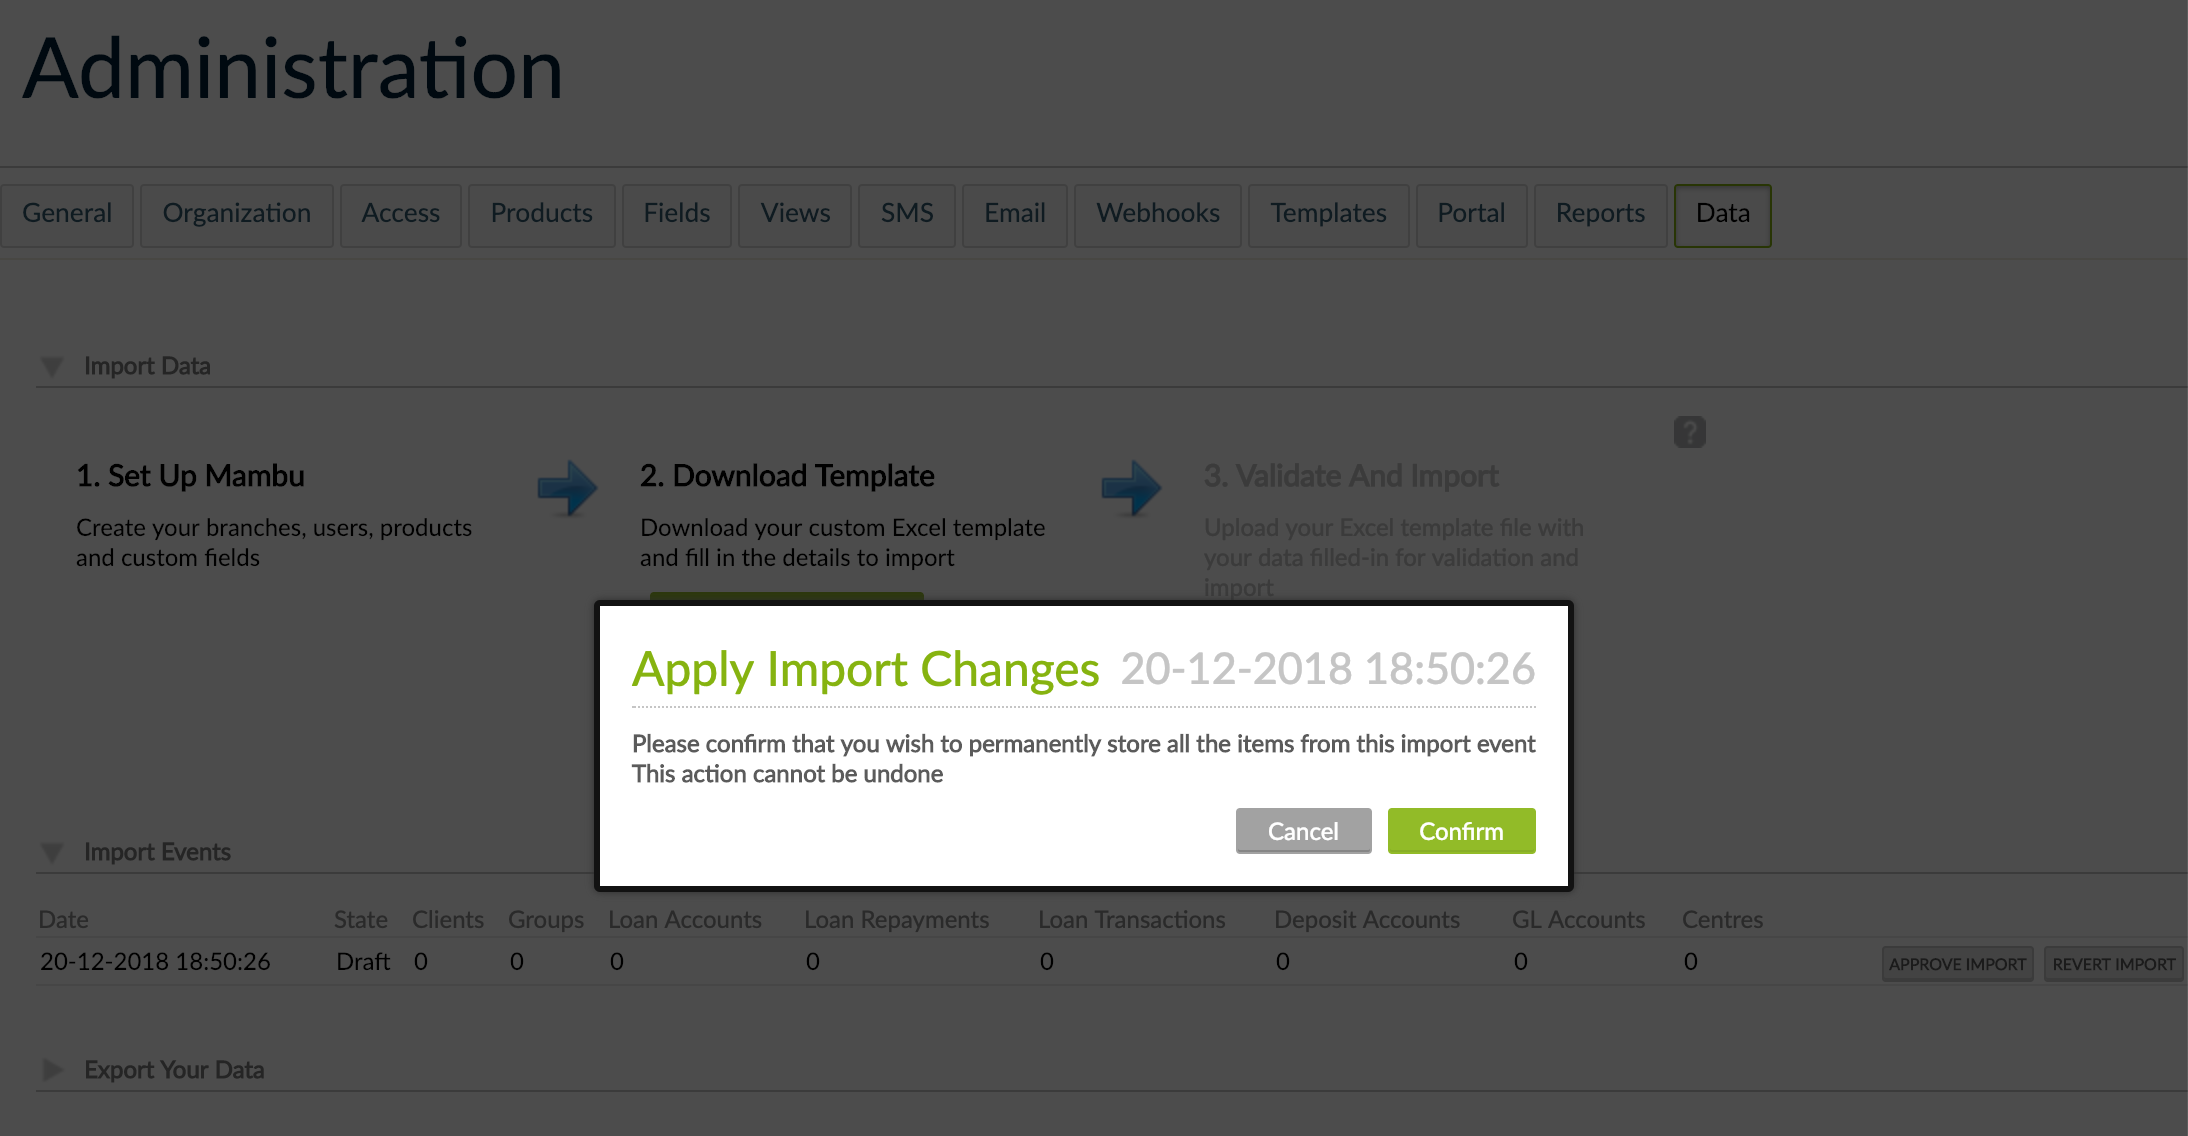 Apply Import Changes pop-up with Cancel and Confirm button